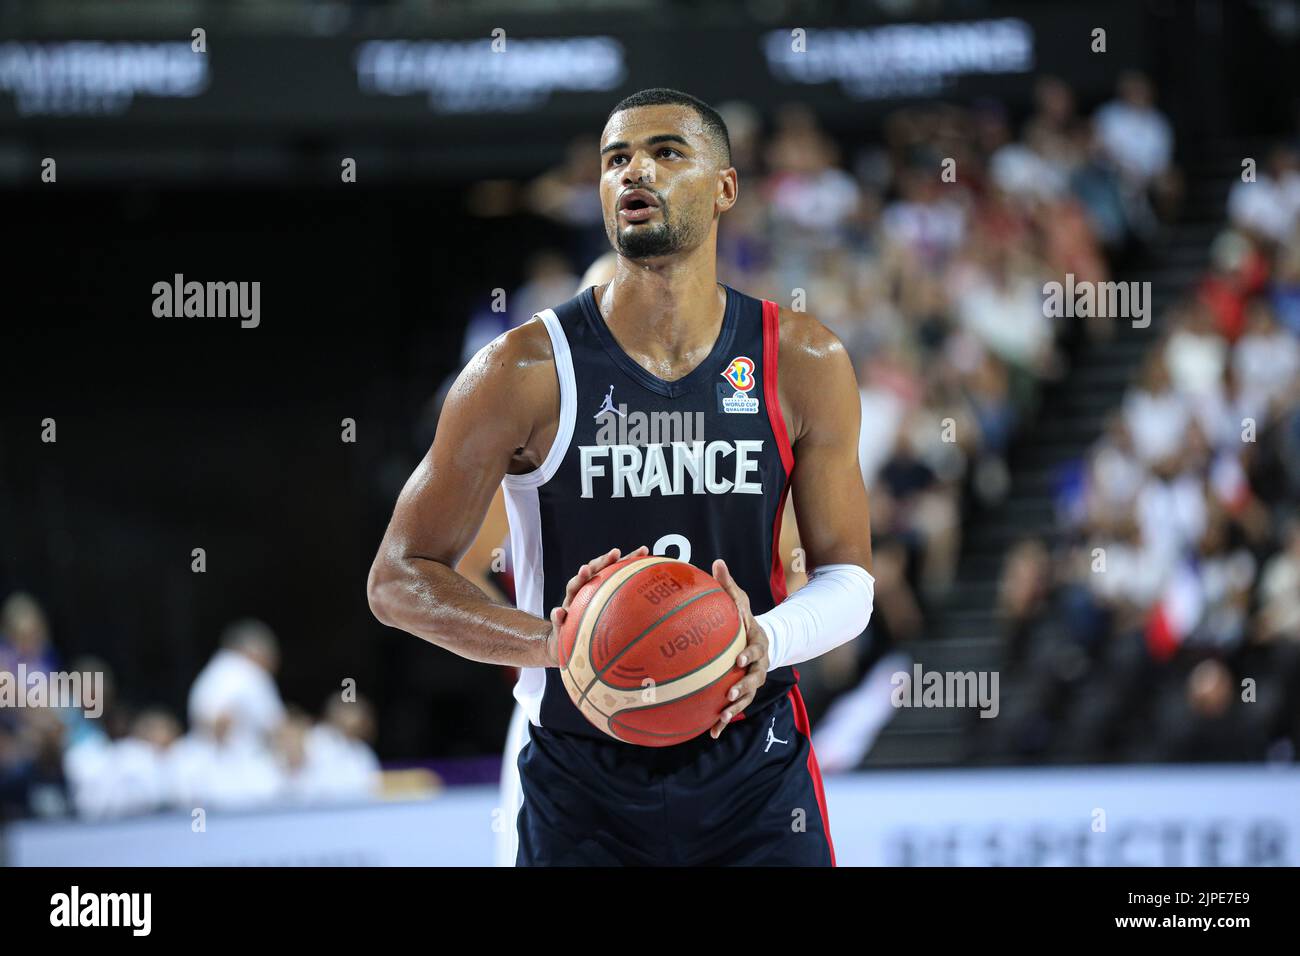 Montpellier, France. 16th Aug, 2022. Second match for the France Basket  team vs Italy in Montpellier as preparing for Eurobasket 2022. The winner  is France 100 - 68 (Photo by Norberto Maccagno/Pacific